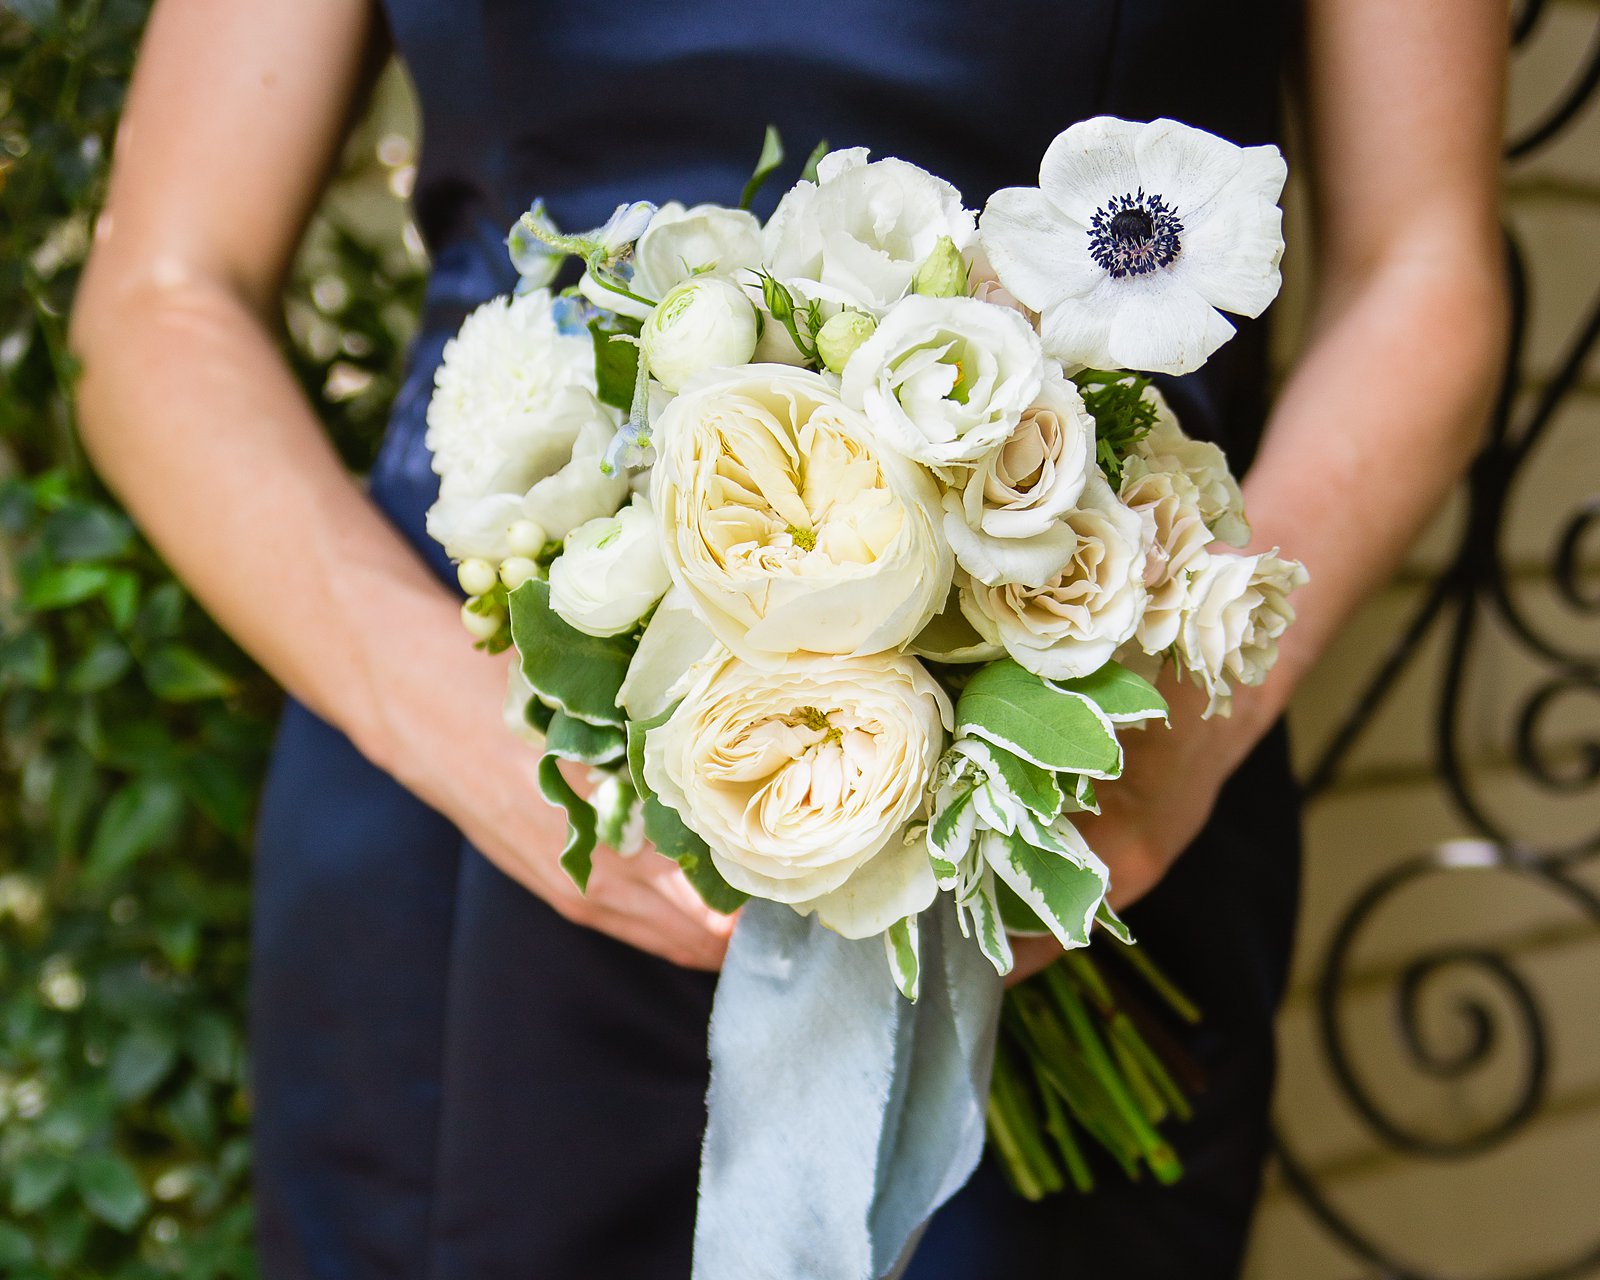 Bridesmaid white and cream bouquet by PMA Photography.